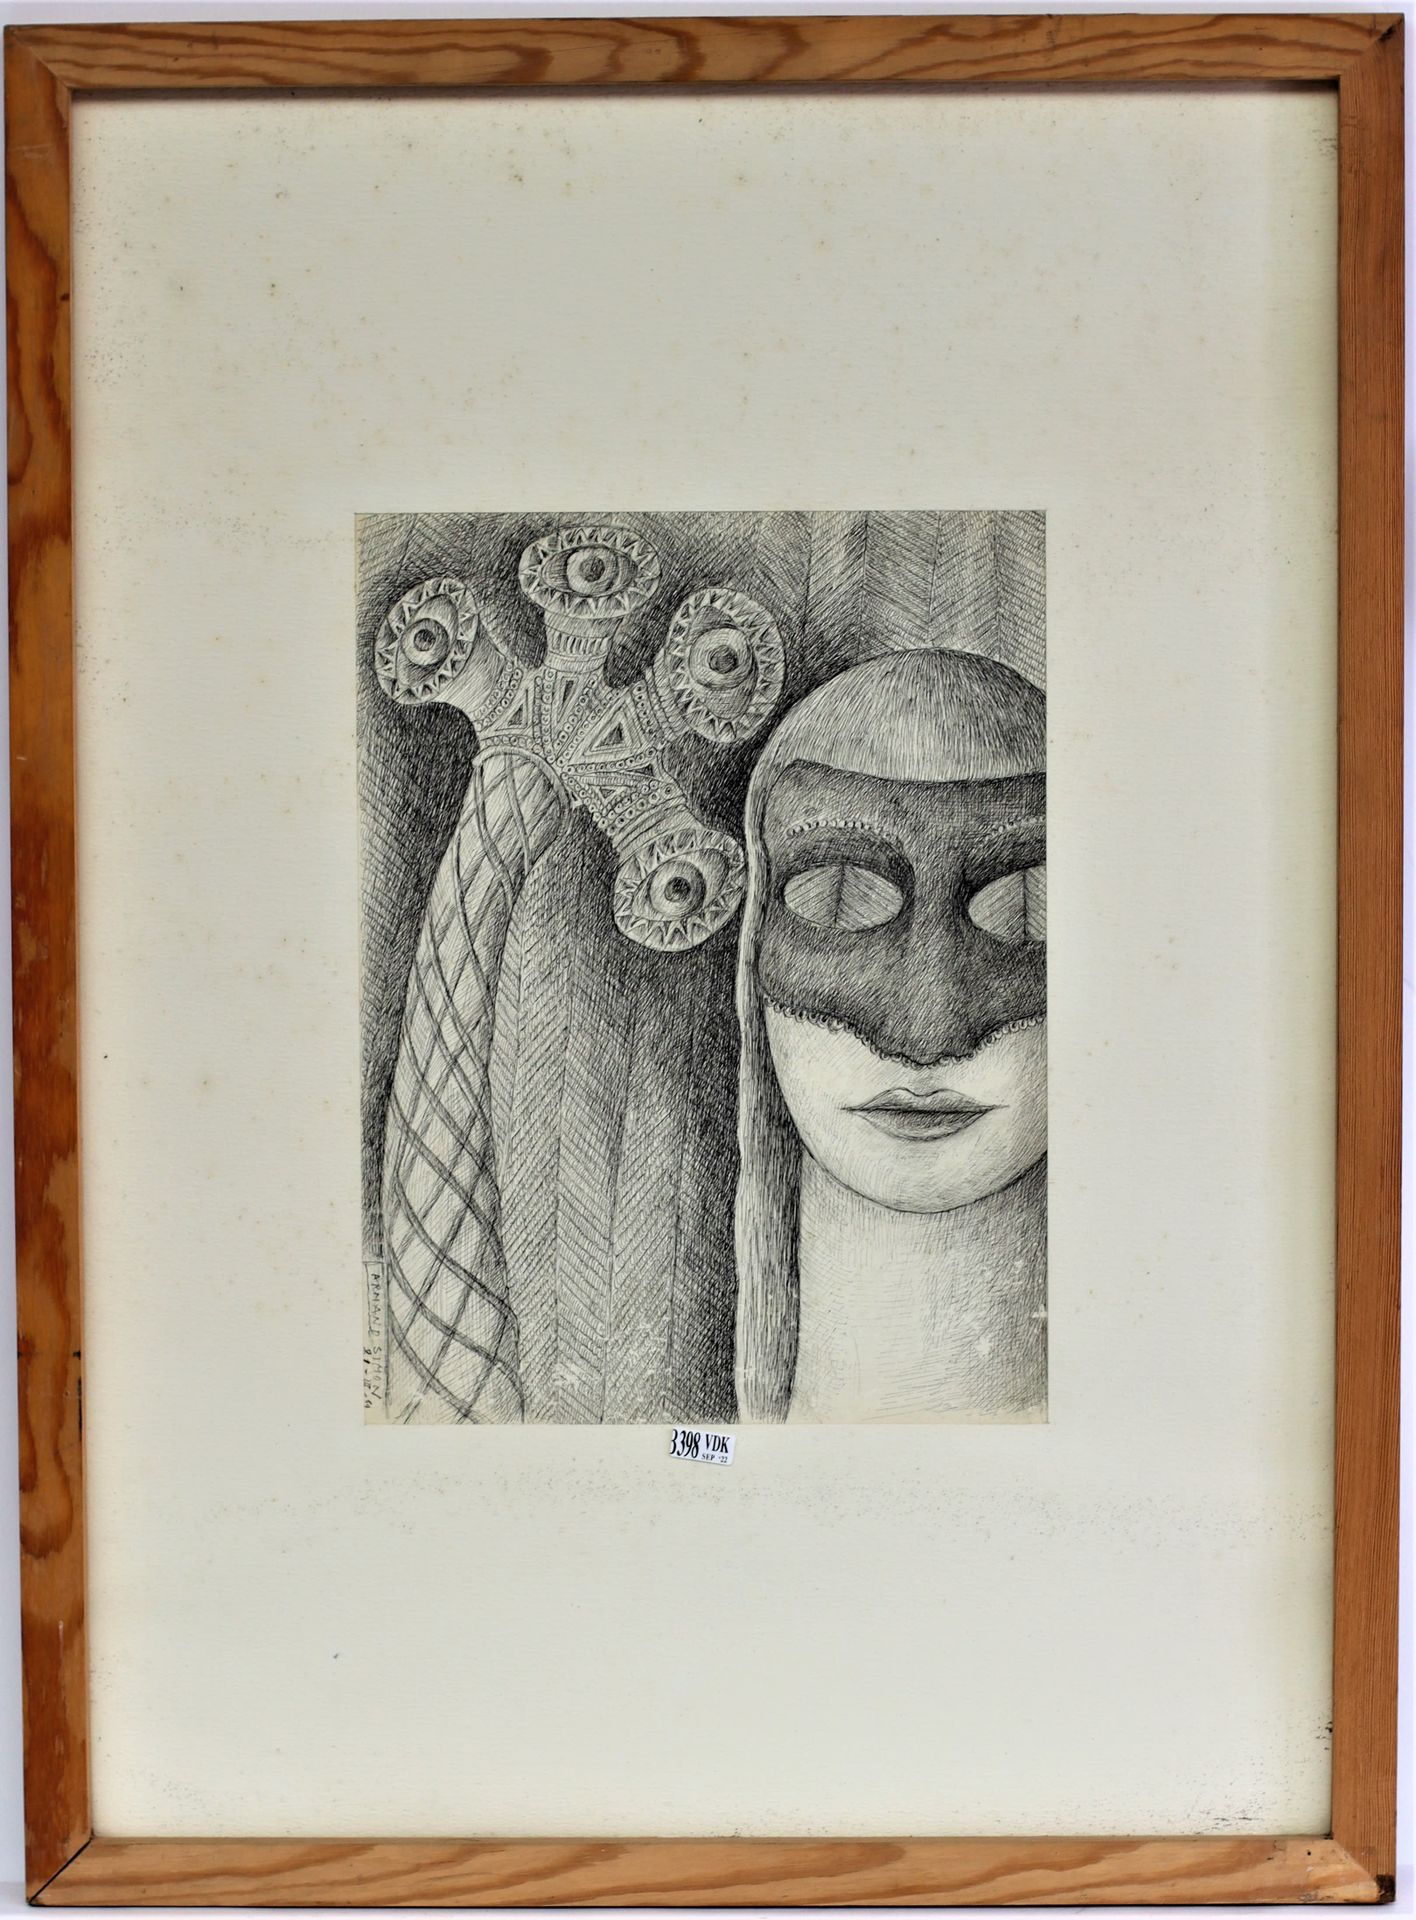 Null Drawing in ink "The mask". Signed Armand Simon 21/3/69. Size: 36x27cm.